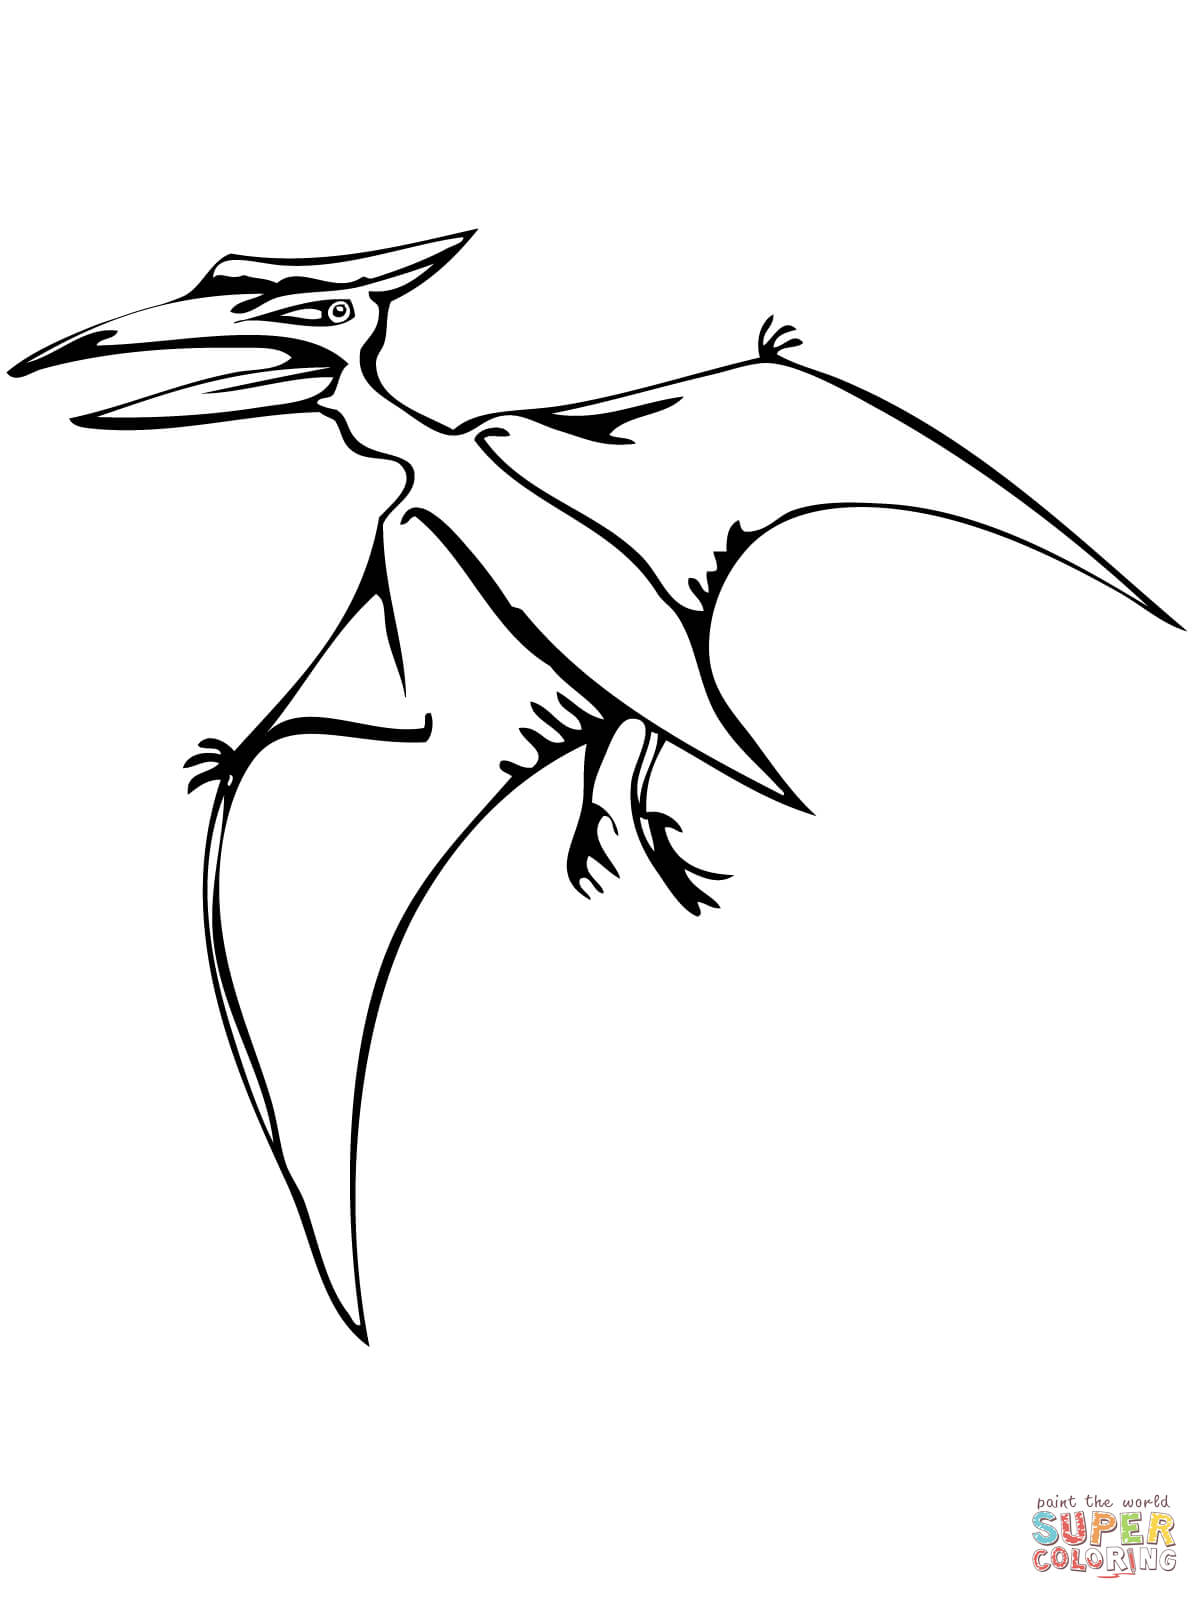 Pteranodon flying reptile coloring page free printable coloring pages